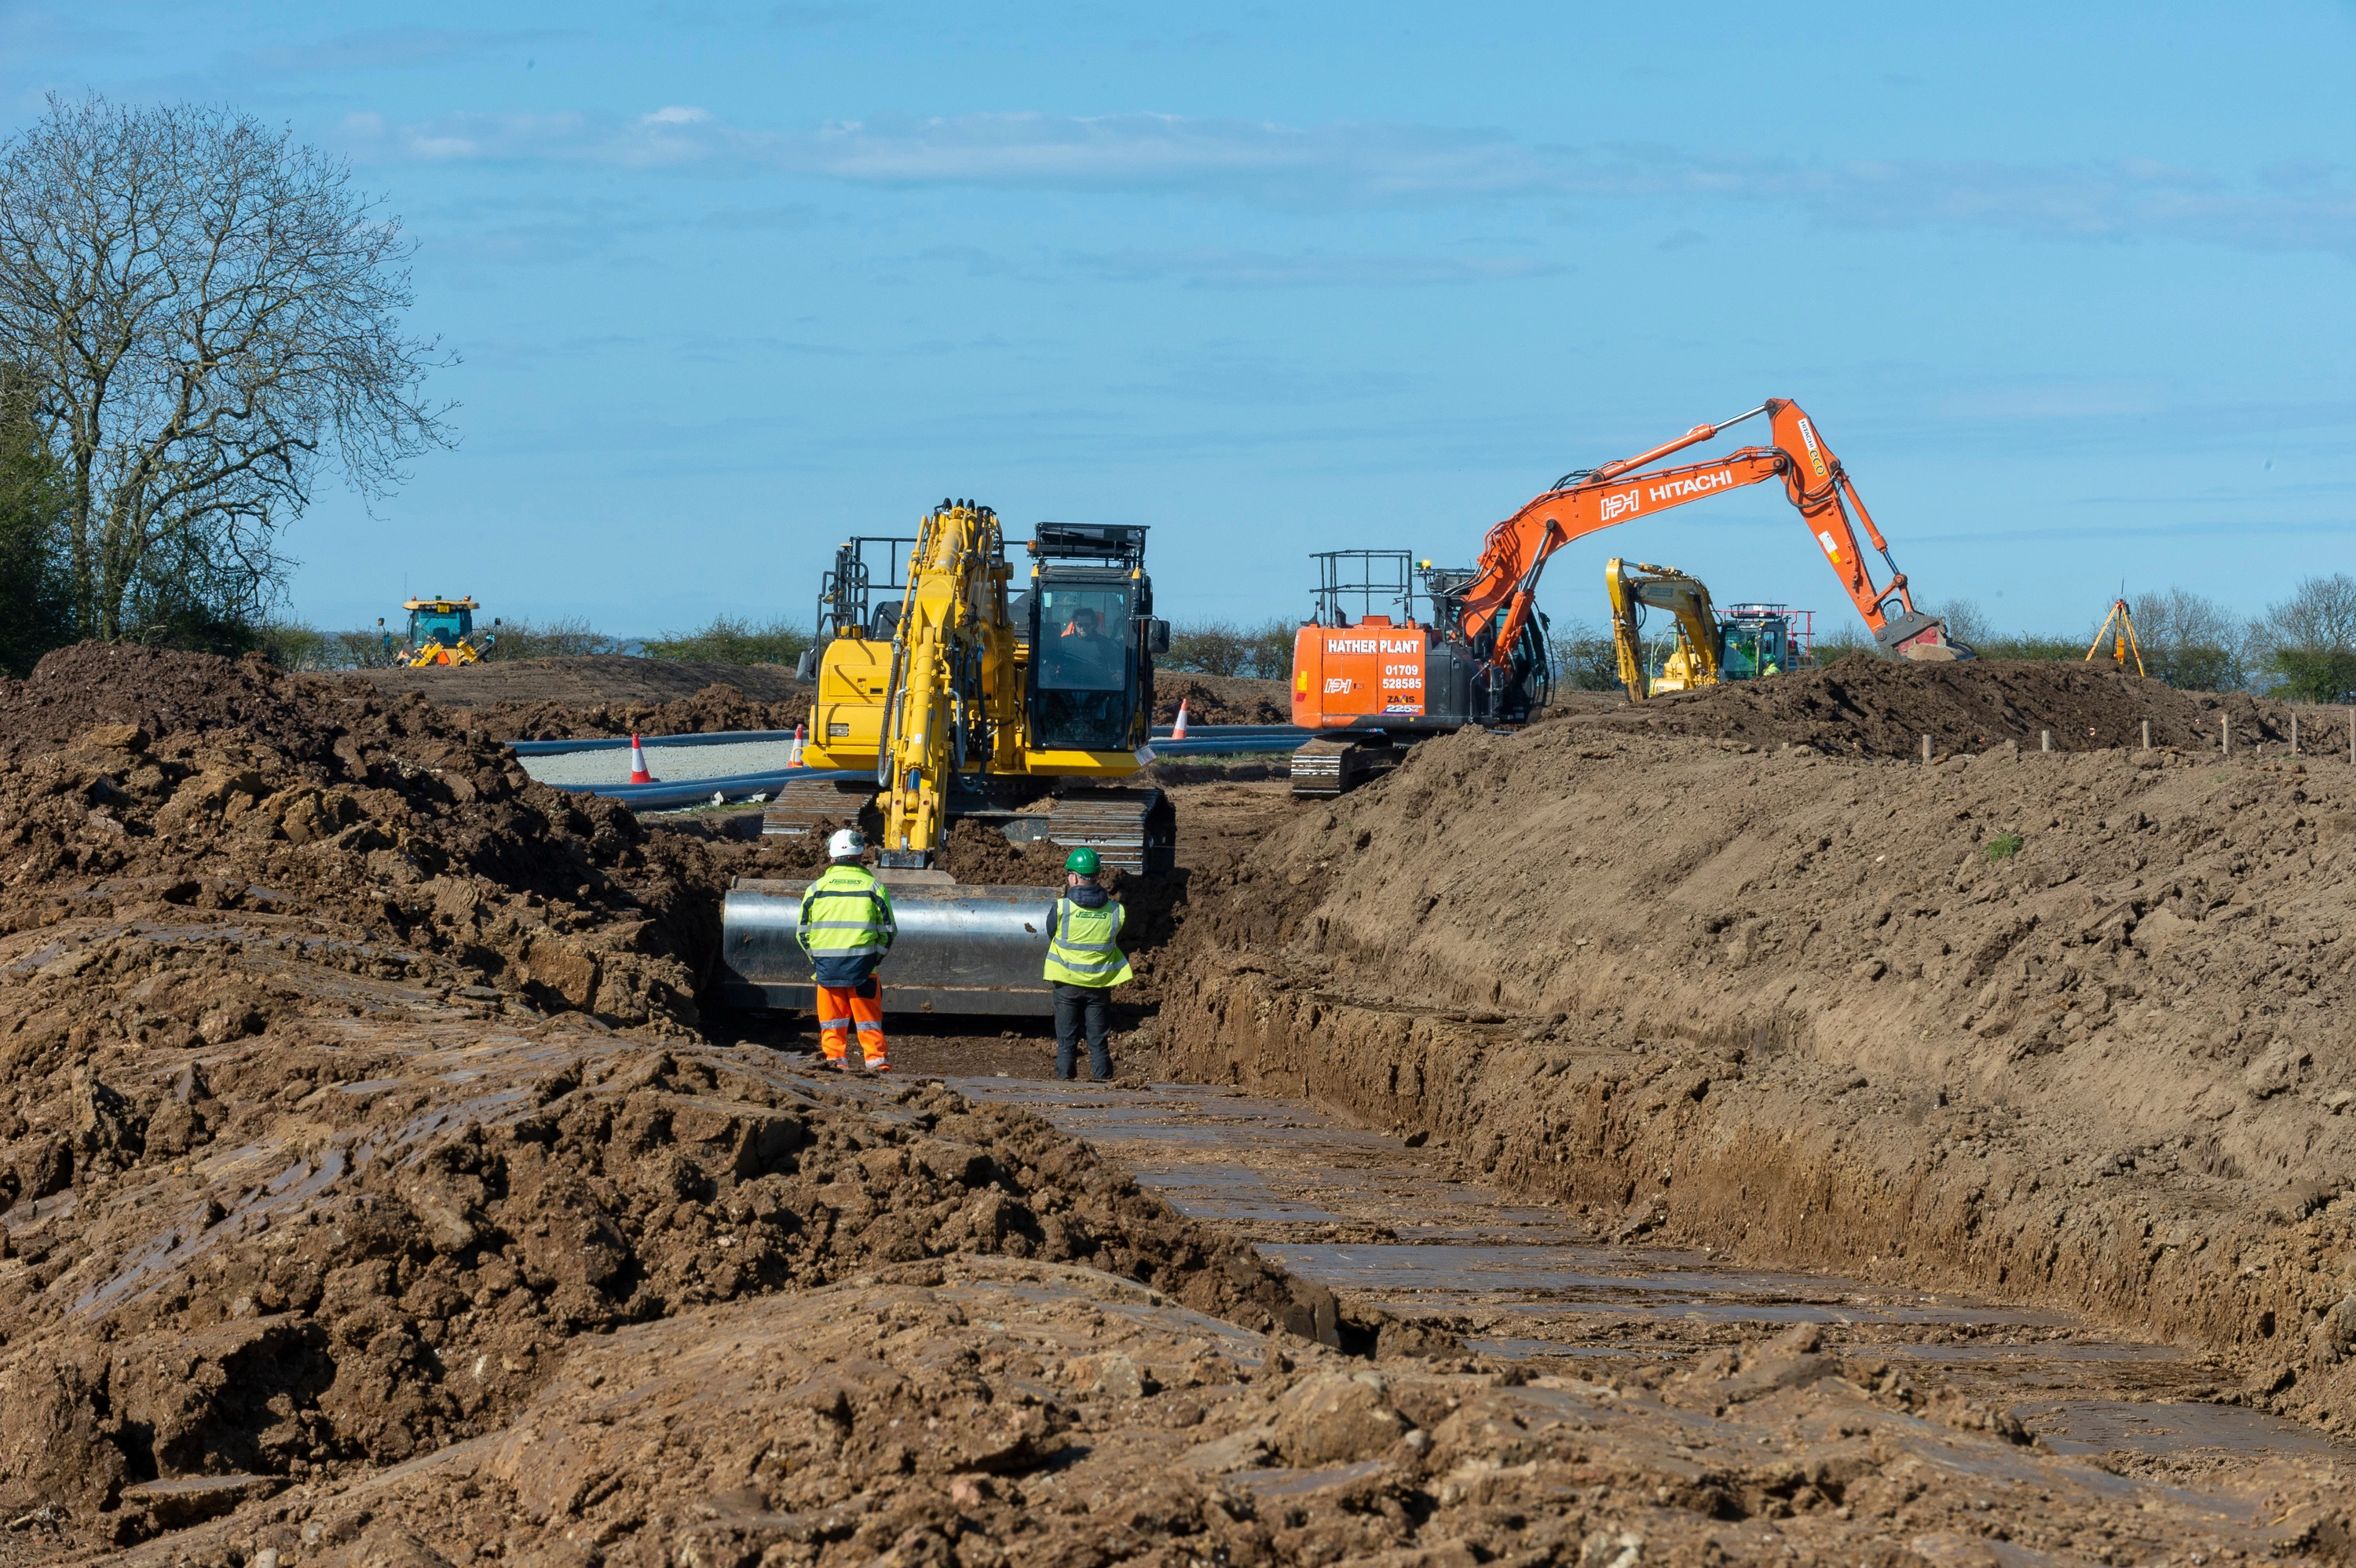 Civil engineering workers preparing trenches on-site at Dogger Bank